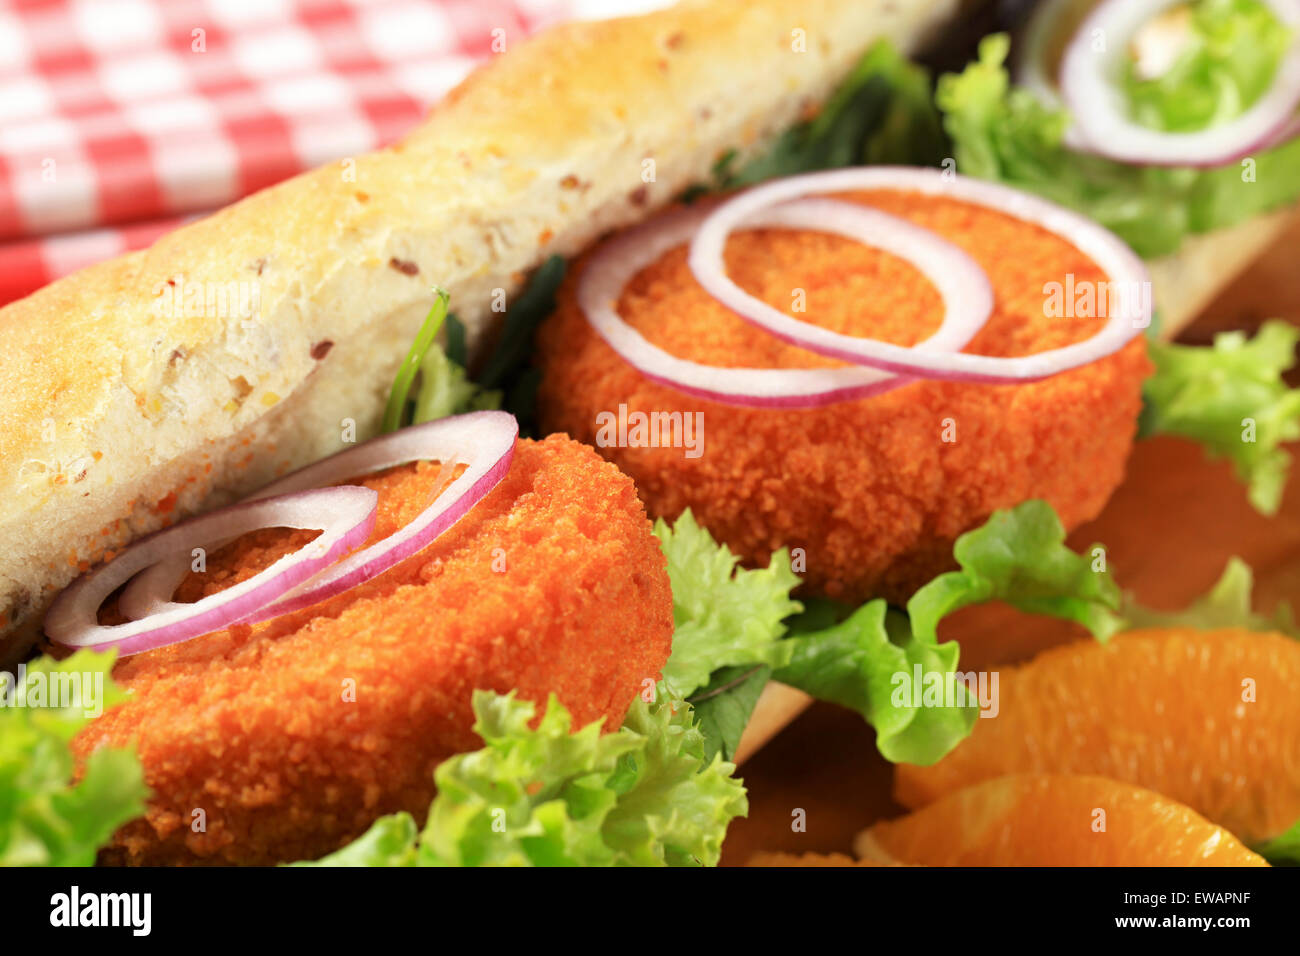 Sub sandwich with fried patties and lettuce Stock Photo